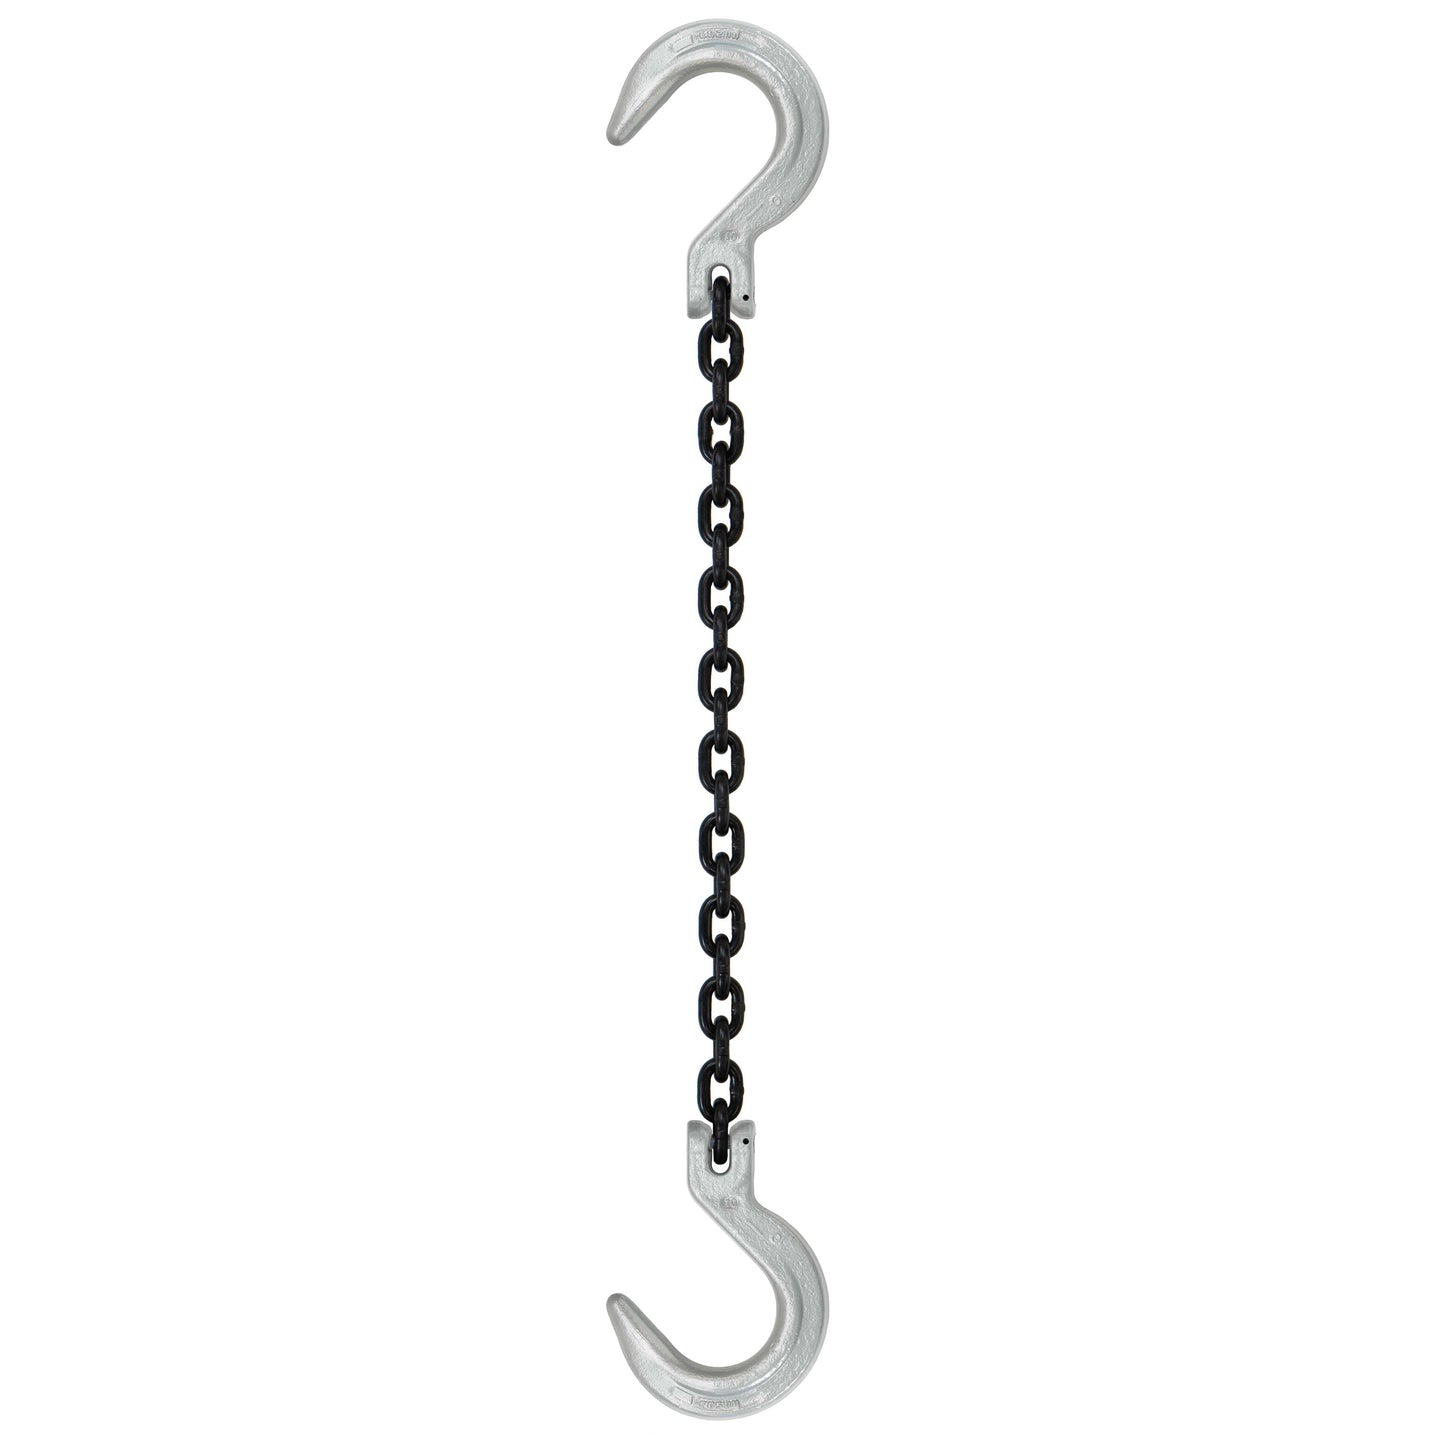 12 inch x 4 foot Domestic Single Leg Chain Sling w Crosby Foundry & Foundry Hooks Grade 100 image 1 of 2